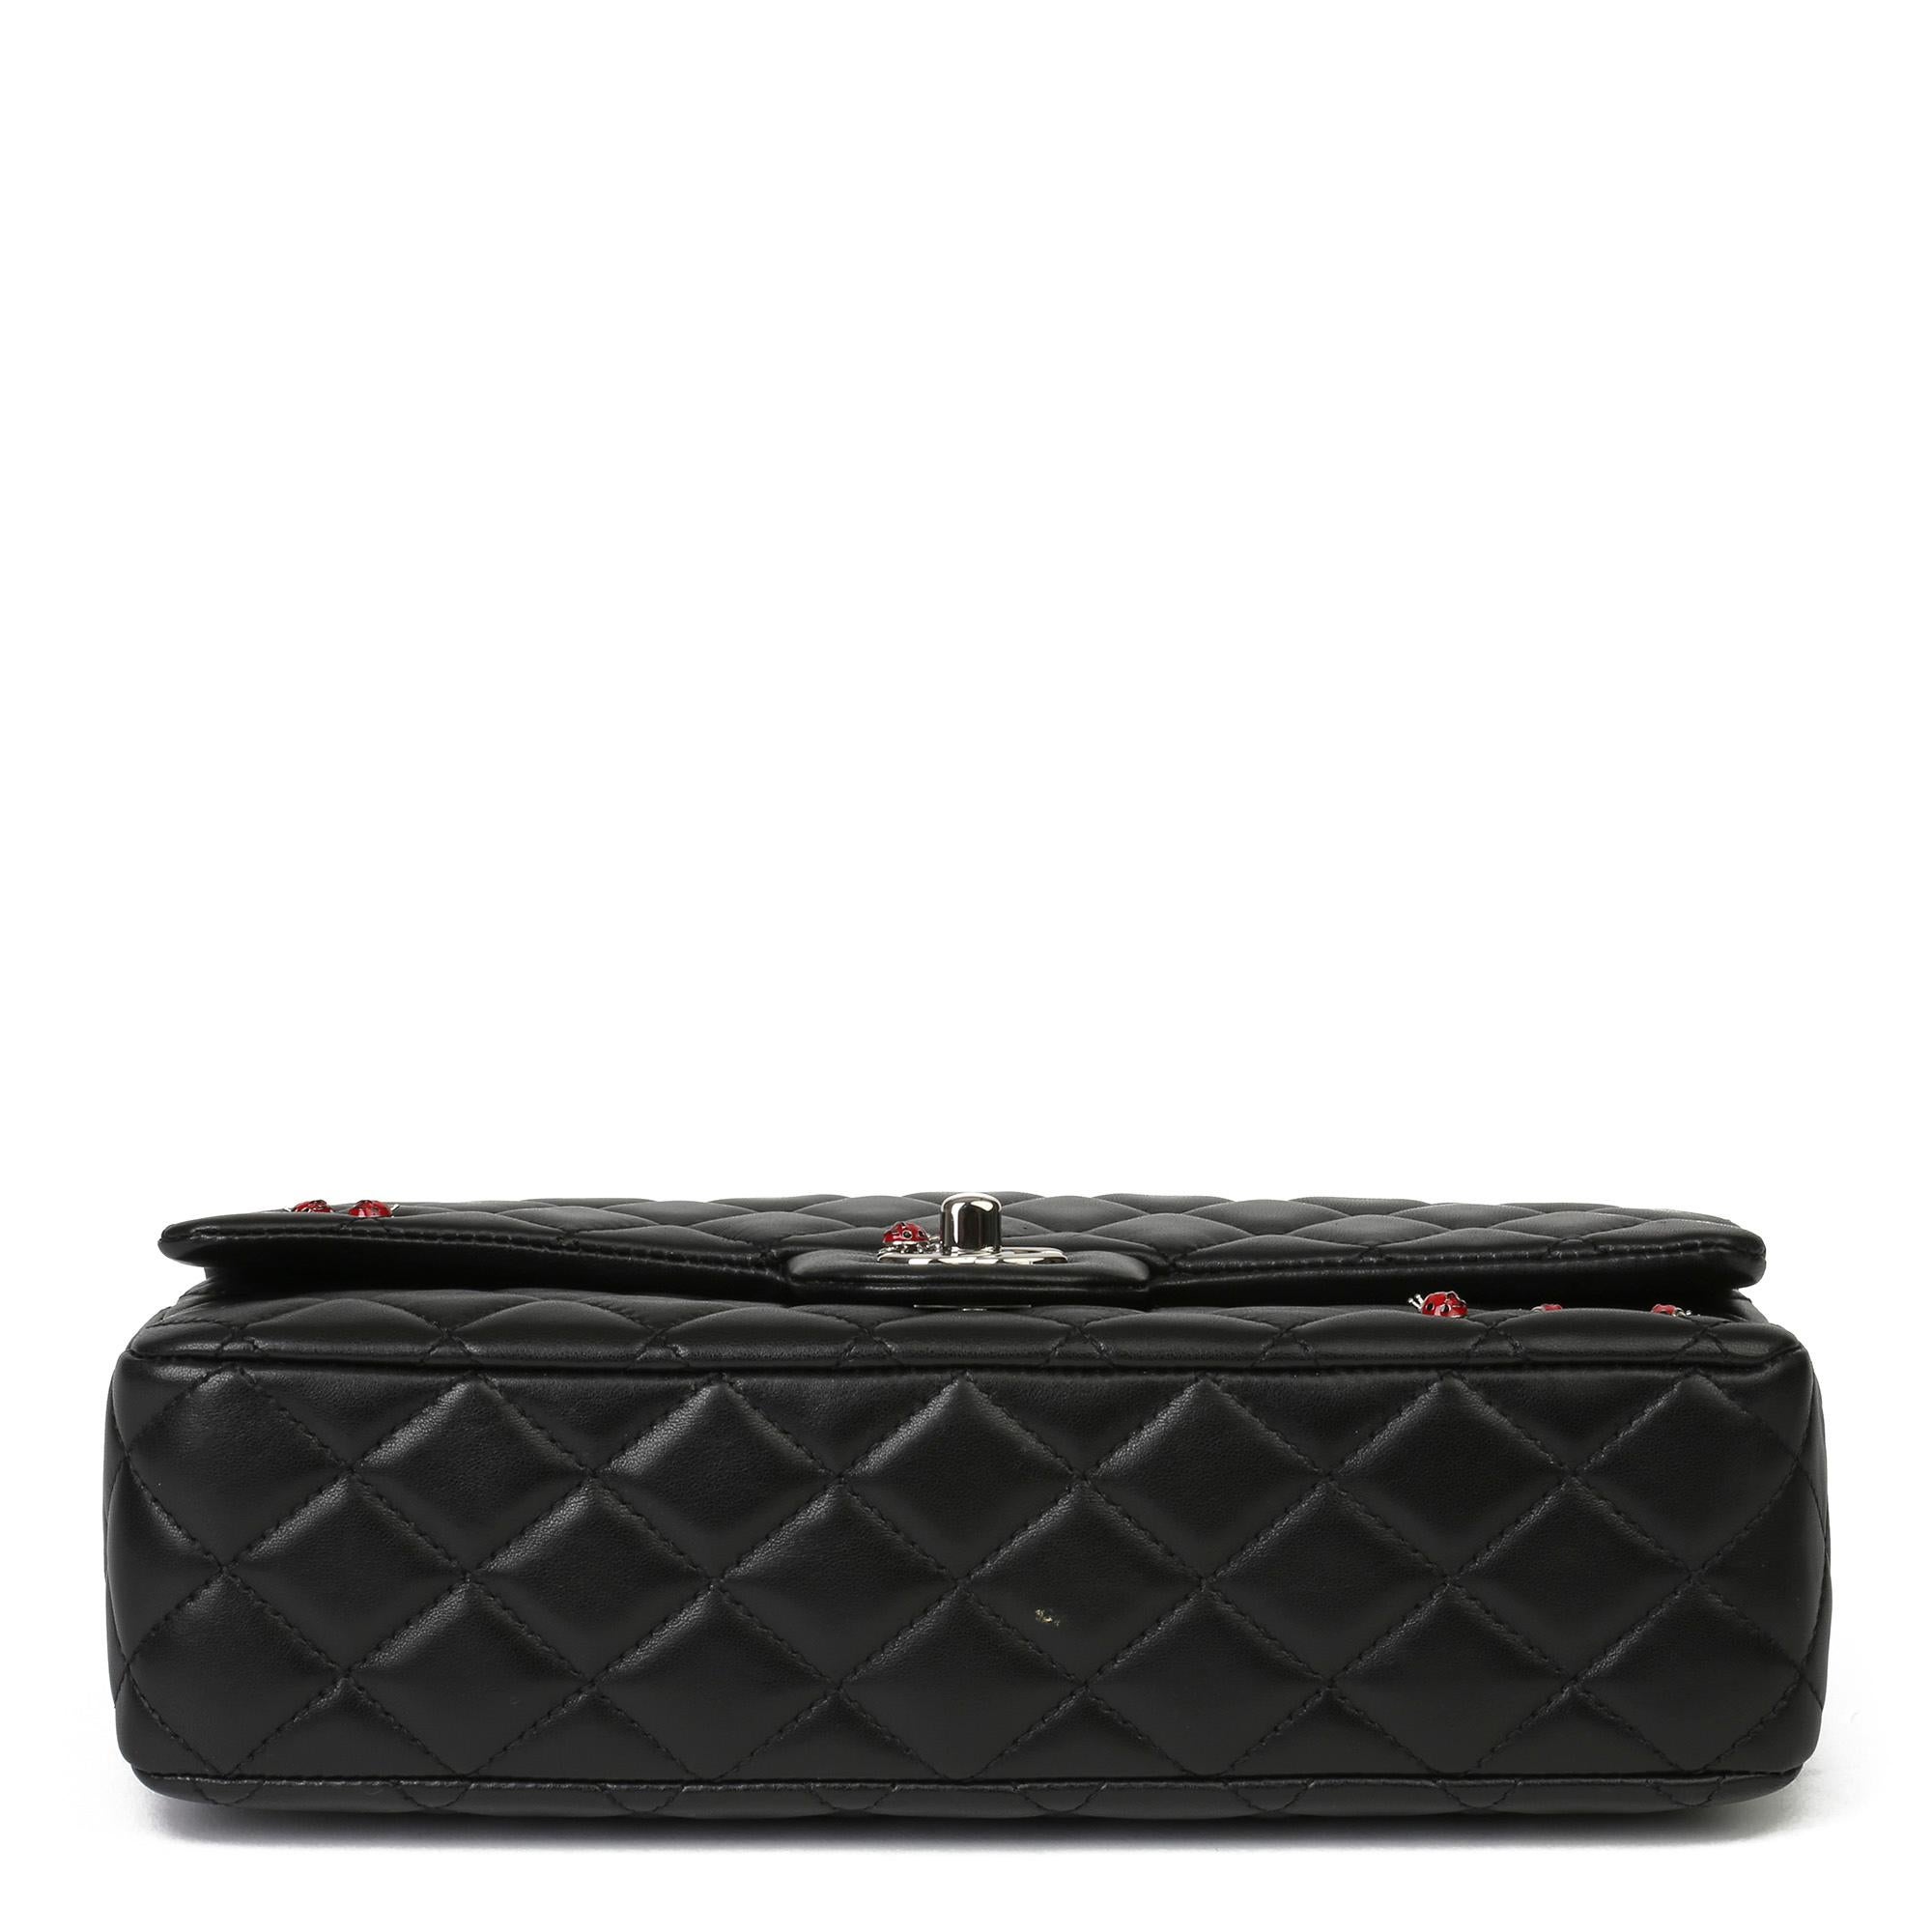 2011 Chanel Black Quilted Lambskin Lady Bug Medium Classic Single Flap Bag In Excellent Condition In Bishop's Stortford, Hertfordshire